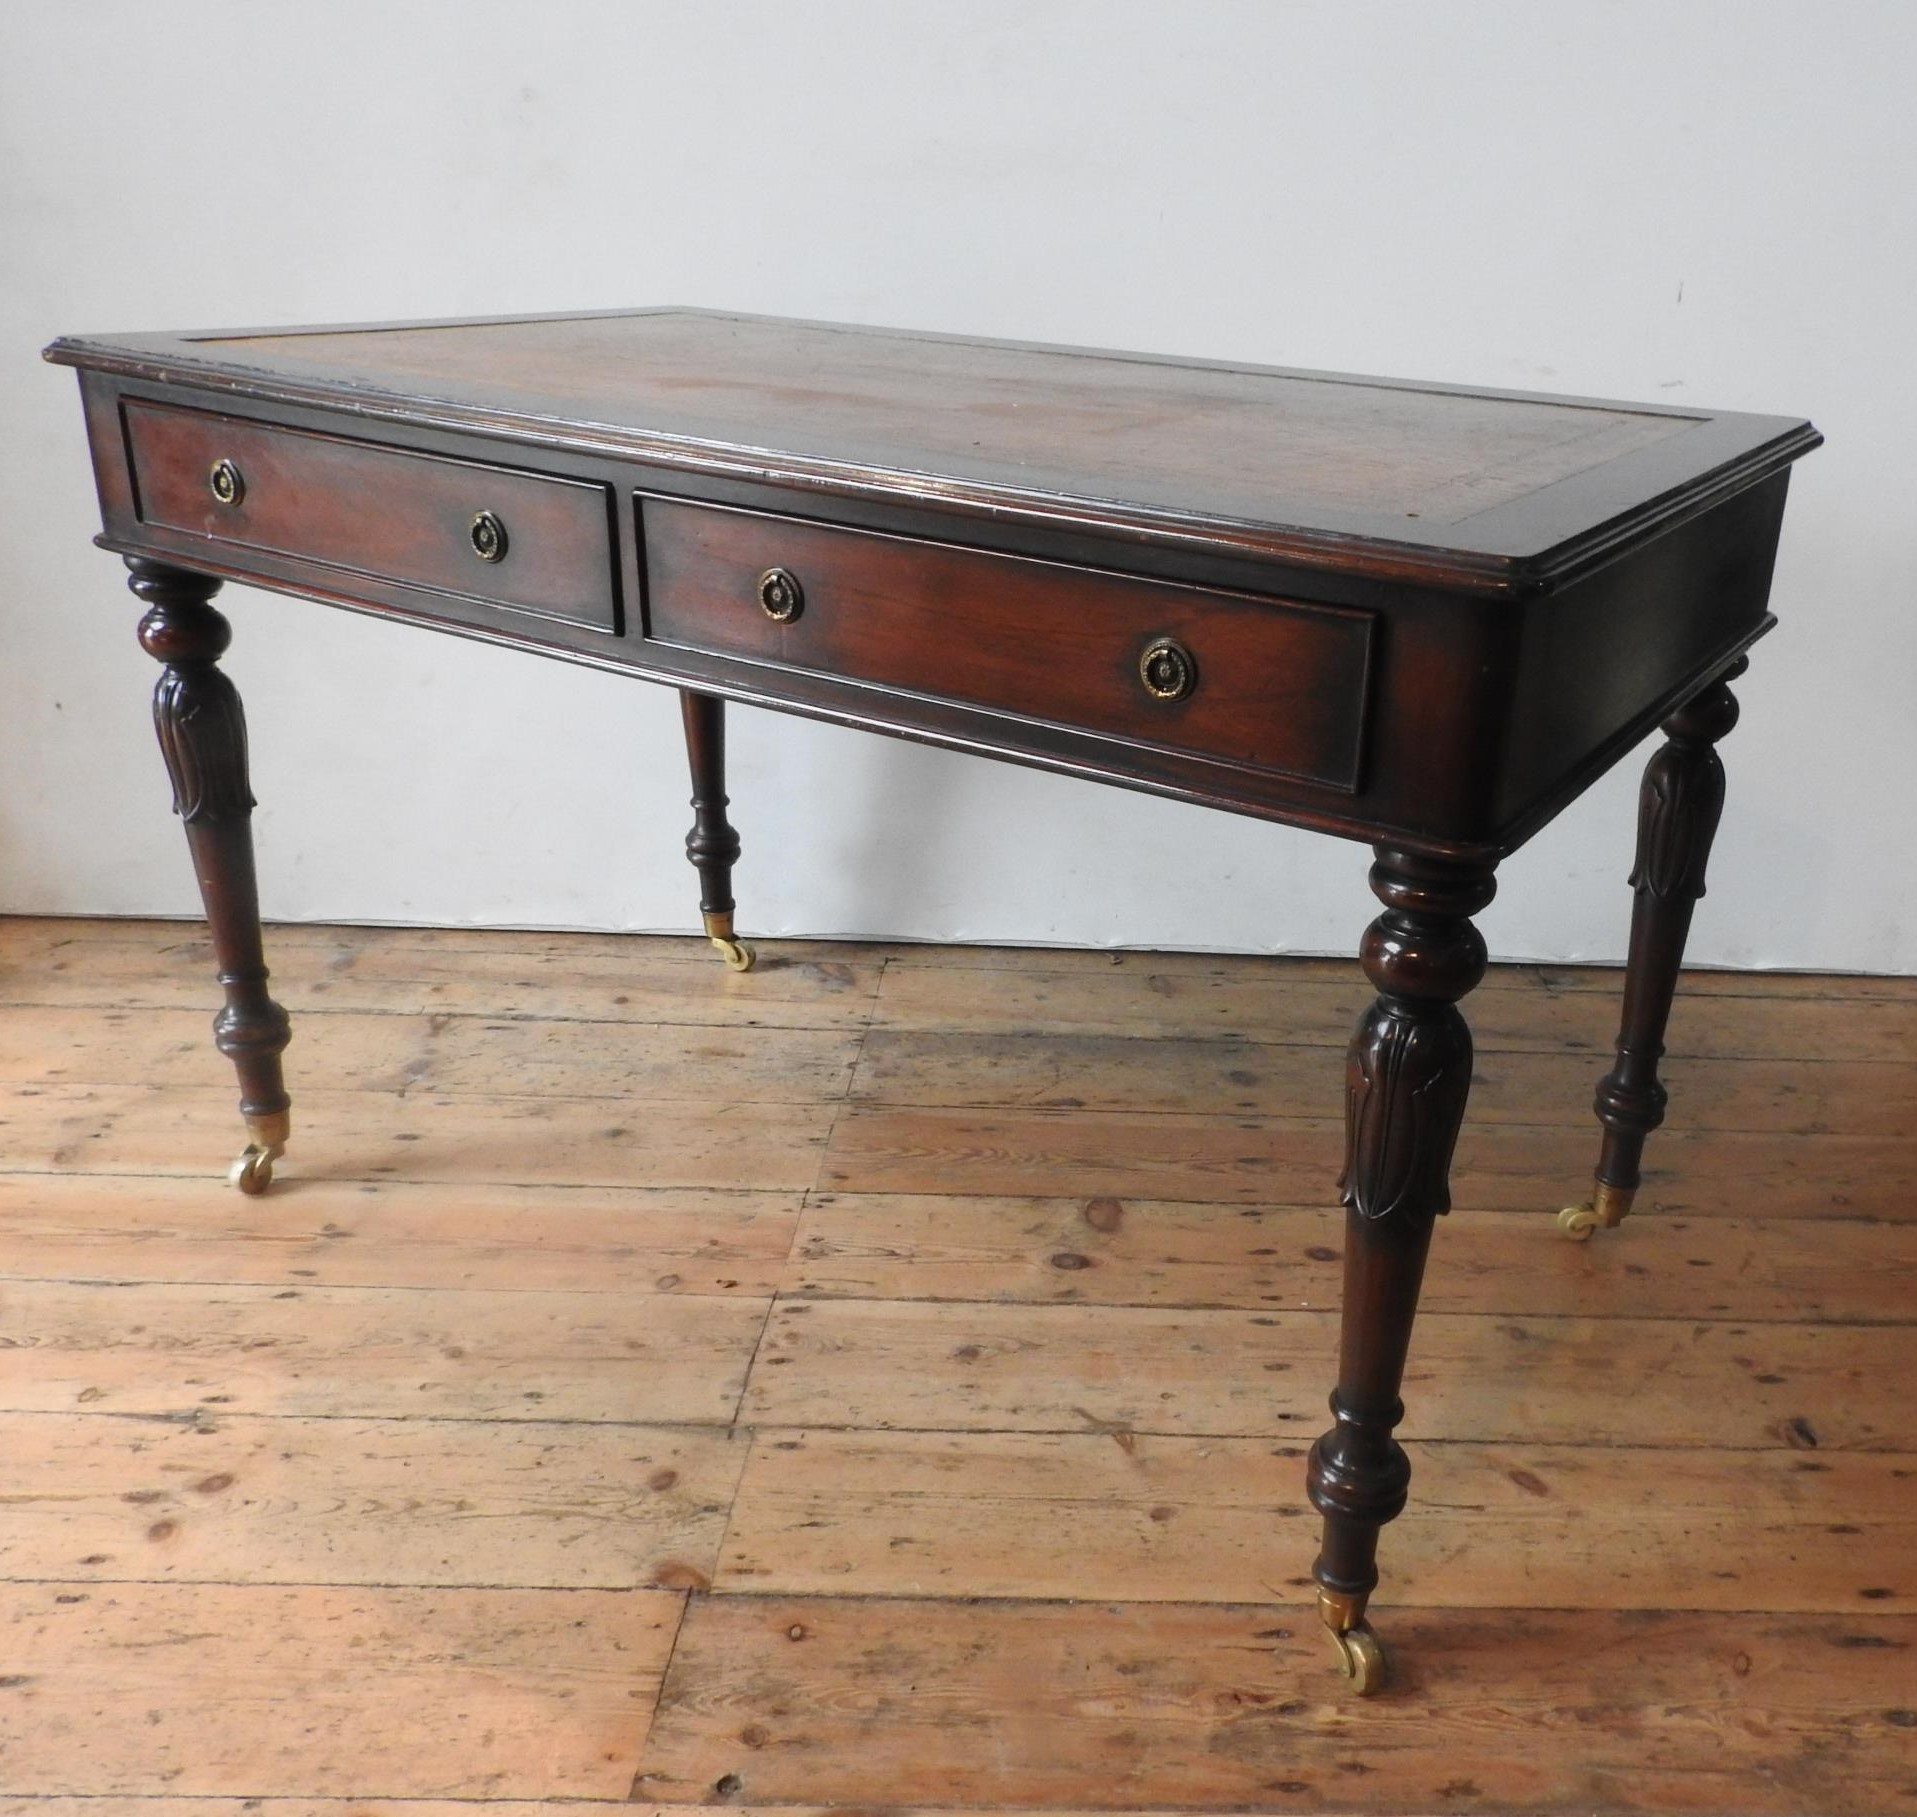 A 20TH CENTURY MAHOGANY REGENCY STYLE LIBRARY TABLE, with leather top, the legs carved with tulip - Image 3 of 3